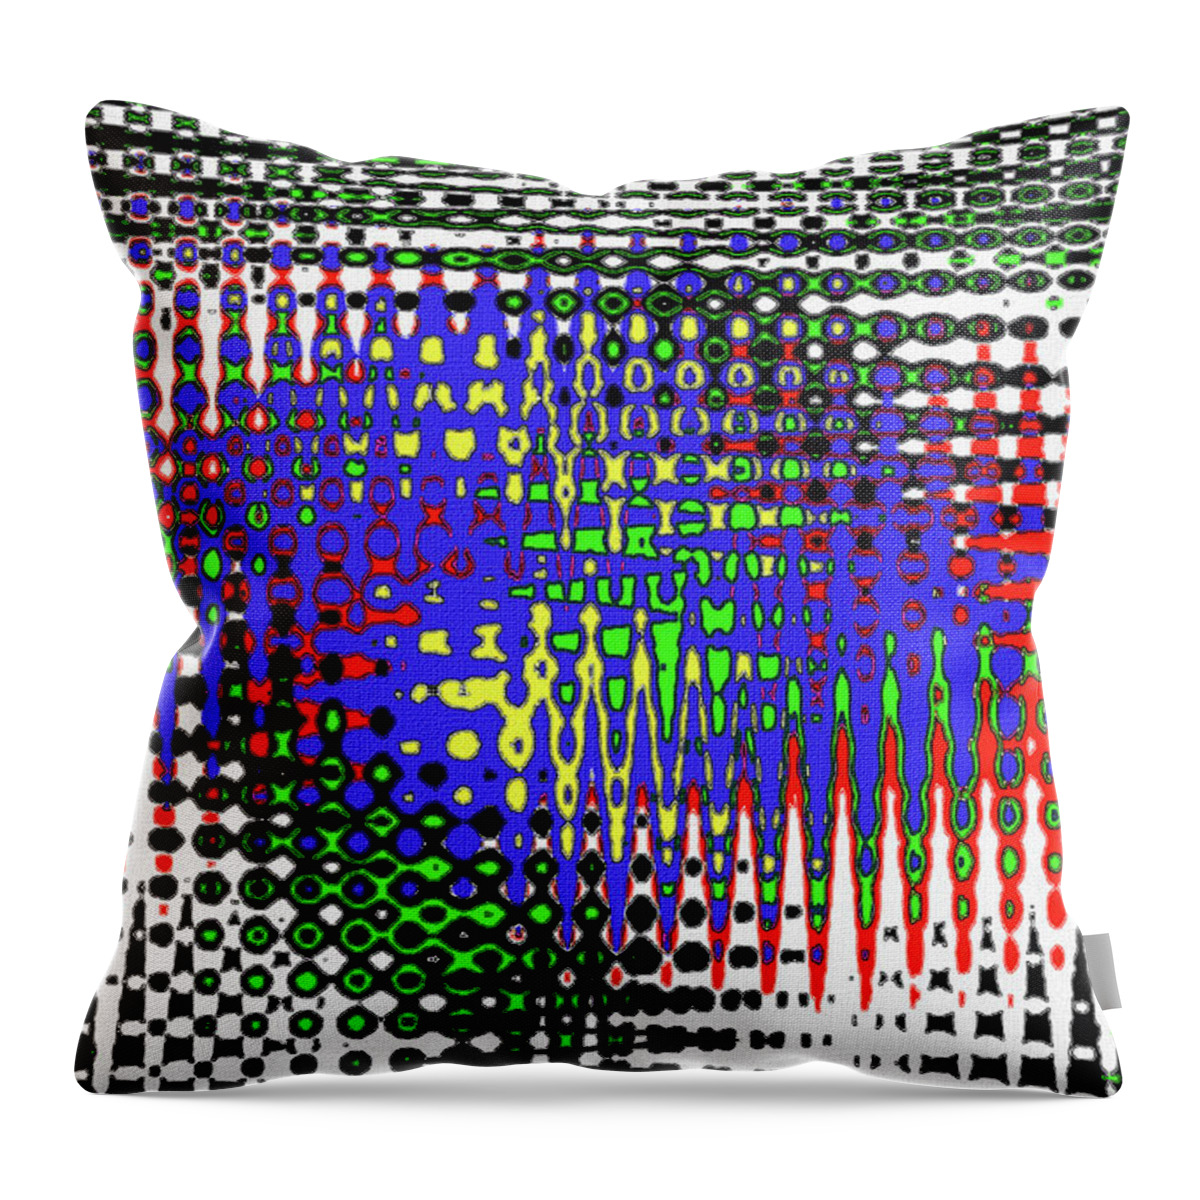 Drawing # 5856 Abstract Throw Pillow featuring the digital art Drawing # 5856 Abstract by Tom Janca